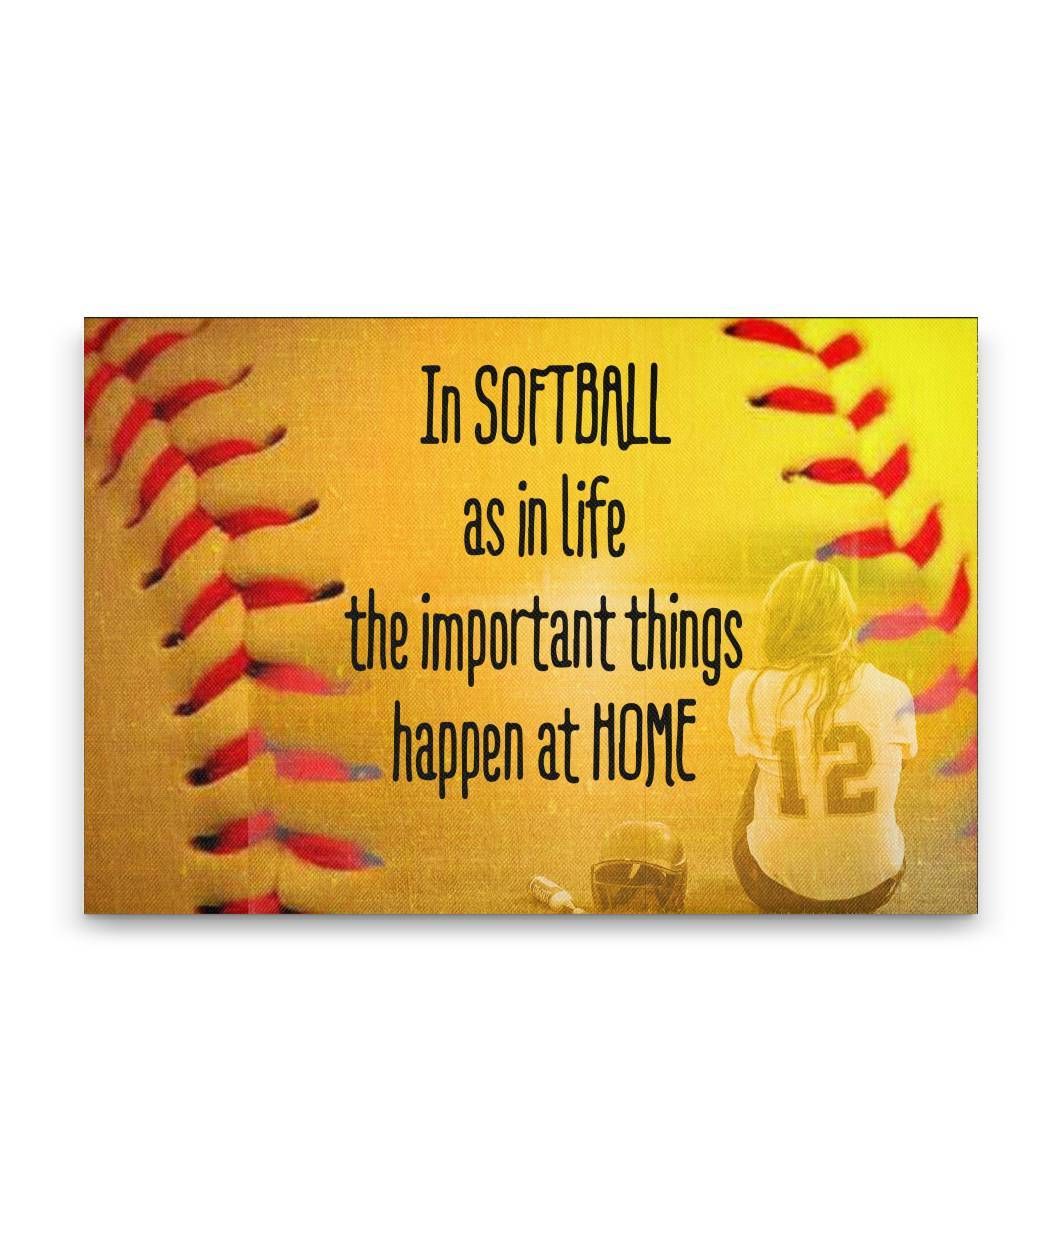 The Important Things Happen At Home Softball Wall Art Canvas Prints PANCAV0002